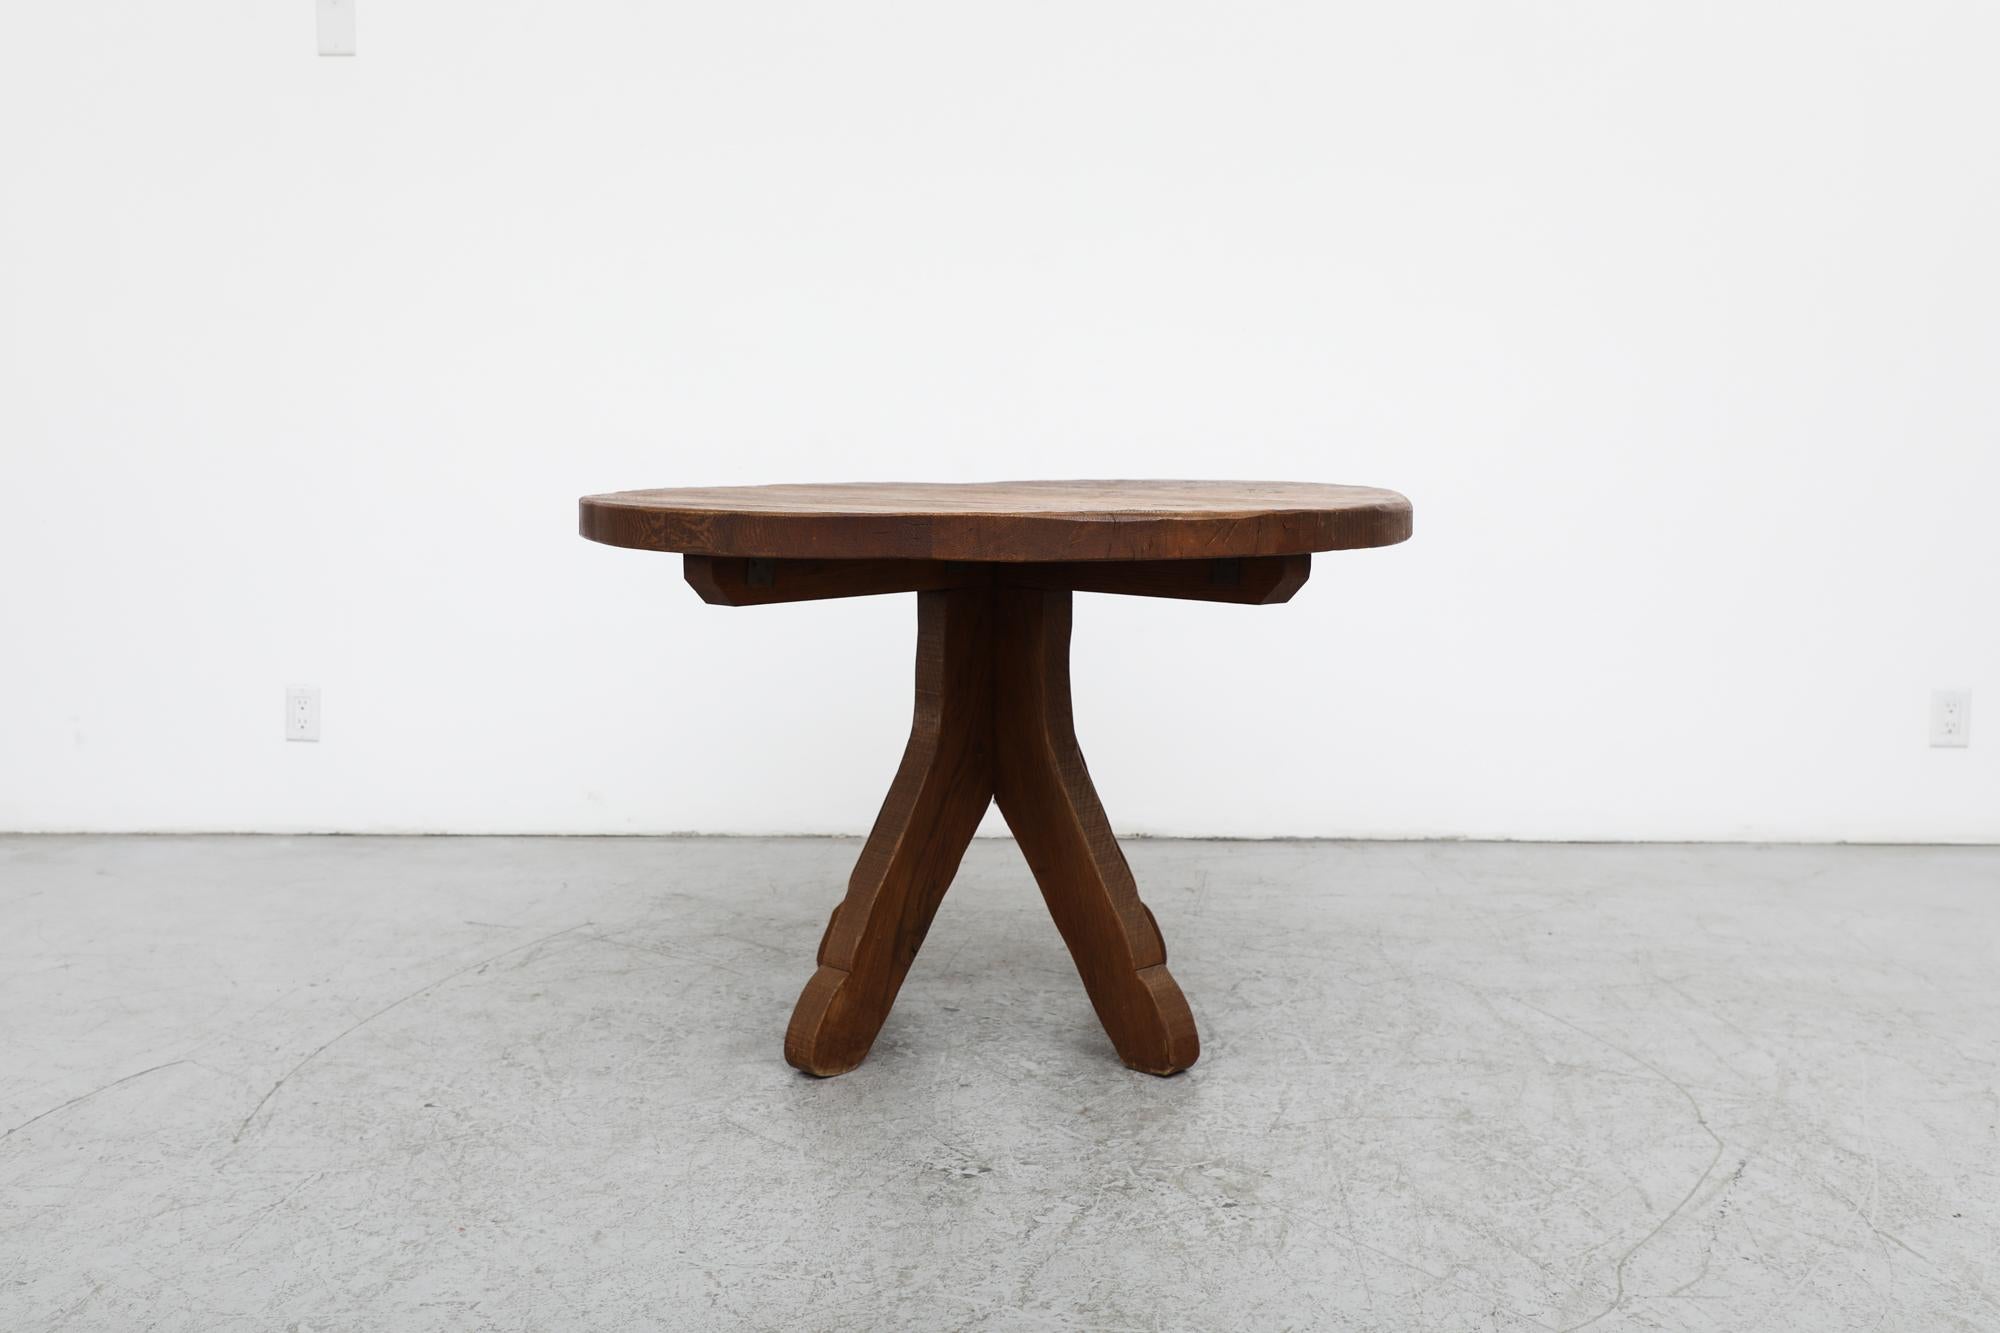 Handsome Mid-century De Puydt attributed natural oak dining table with round top and organically carved, brutalist pedestal base. Sharp but organic silhouette with in heavy, solid oak wood The table is in original condition with some light wear